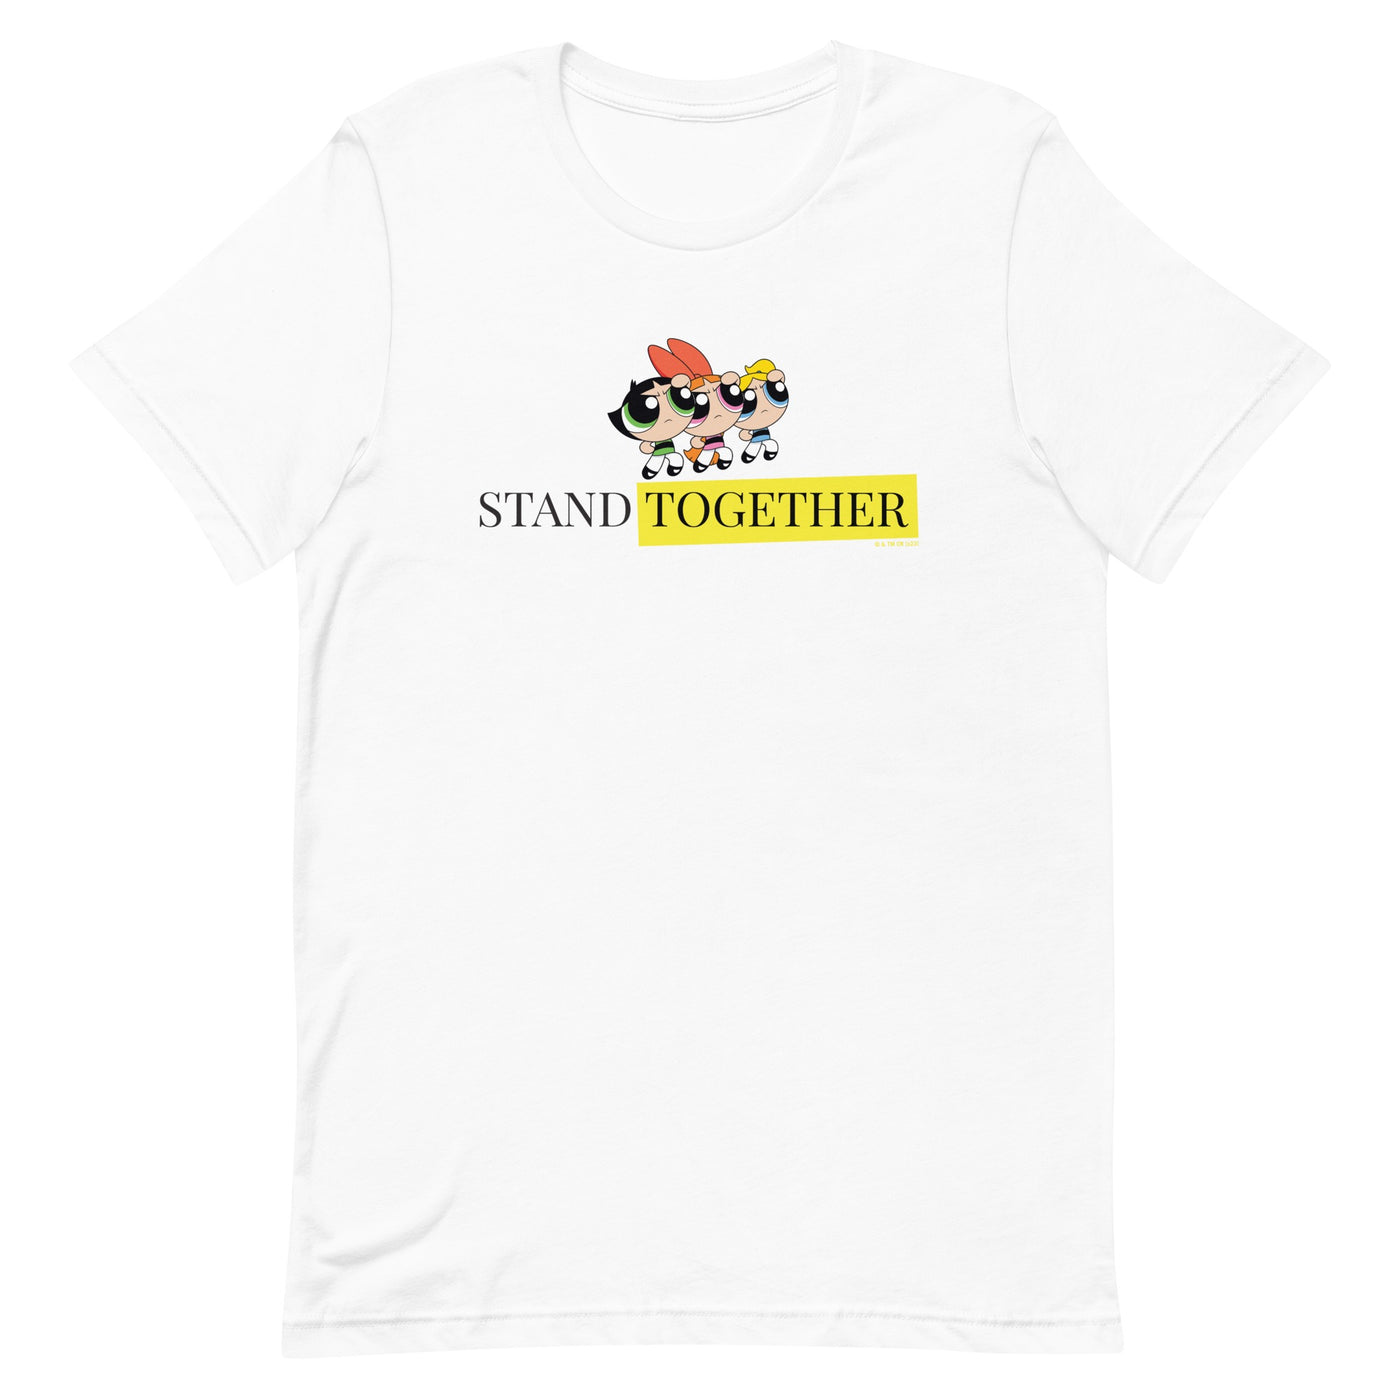 The Powerpuff Girls Stand Together Adult Short Sleeve T-Shirt